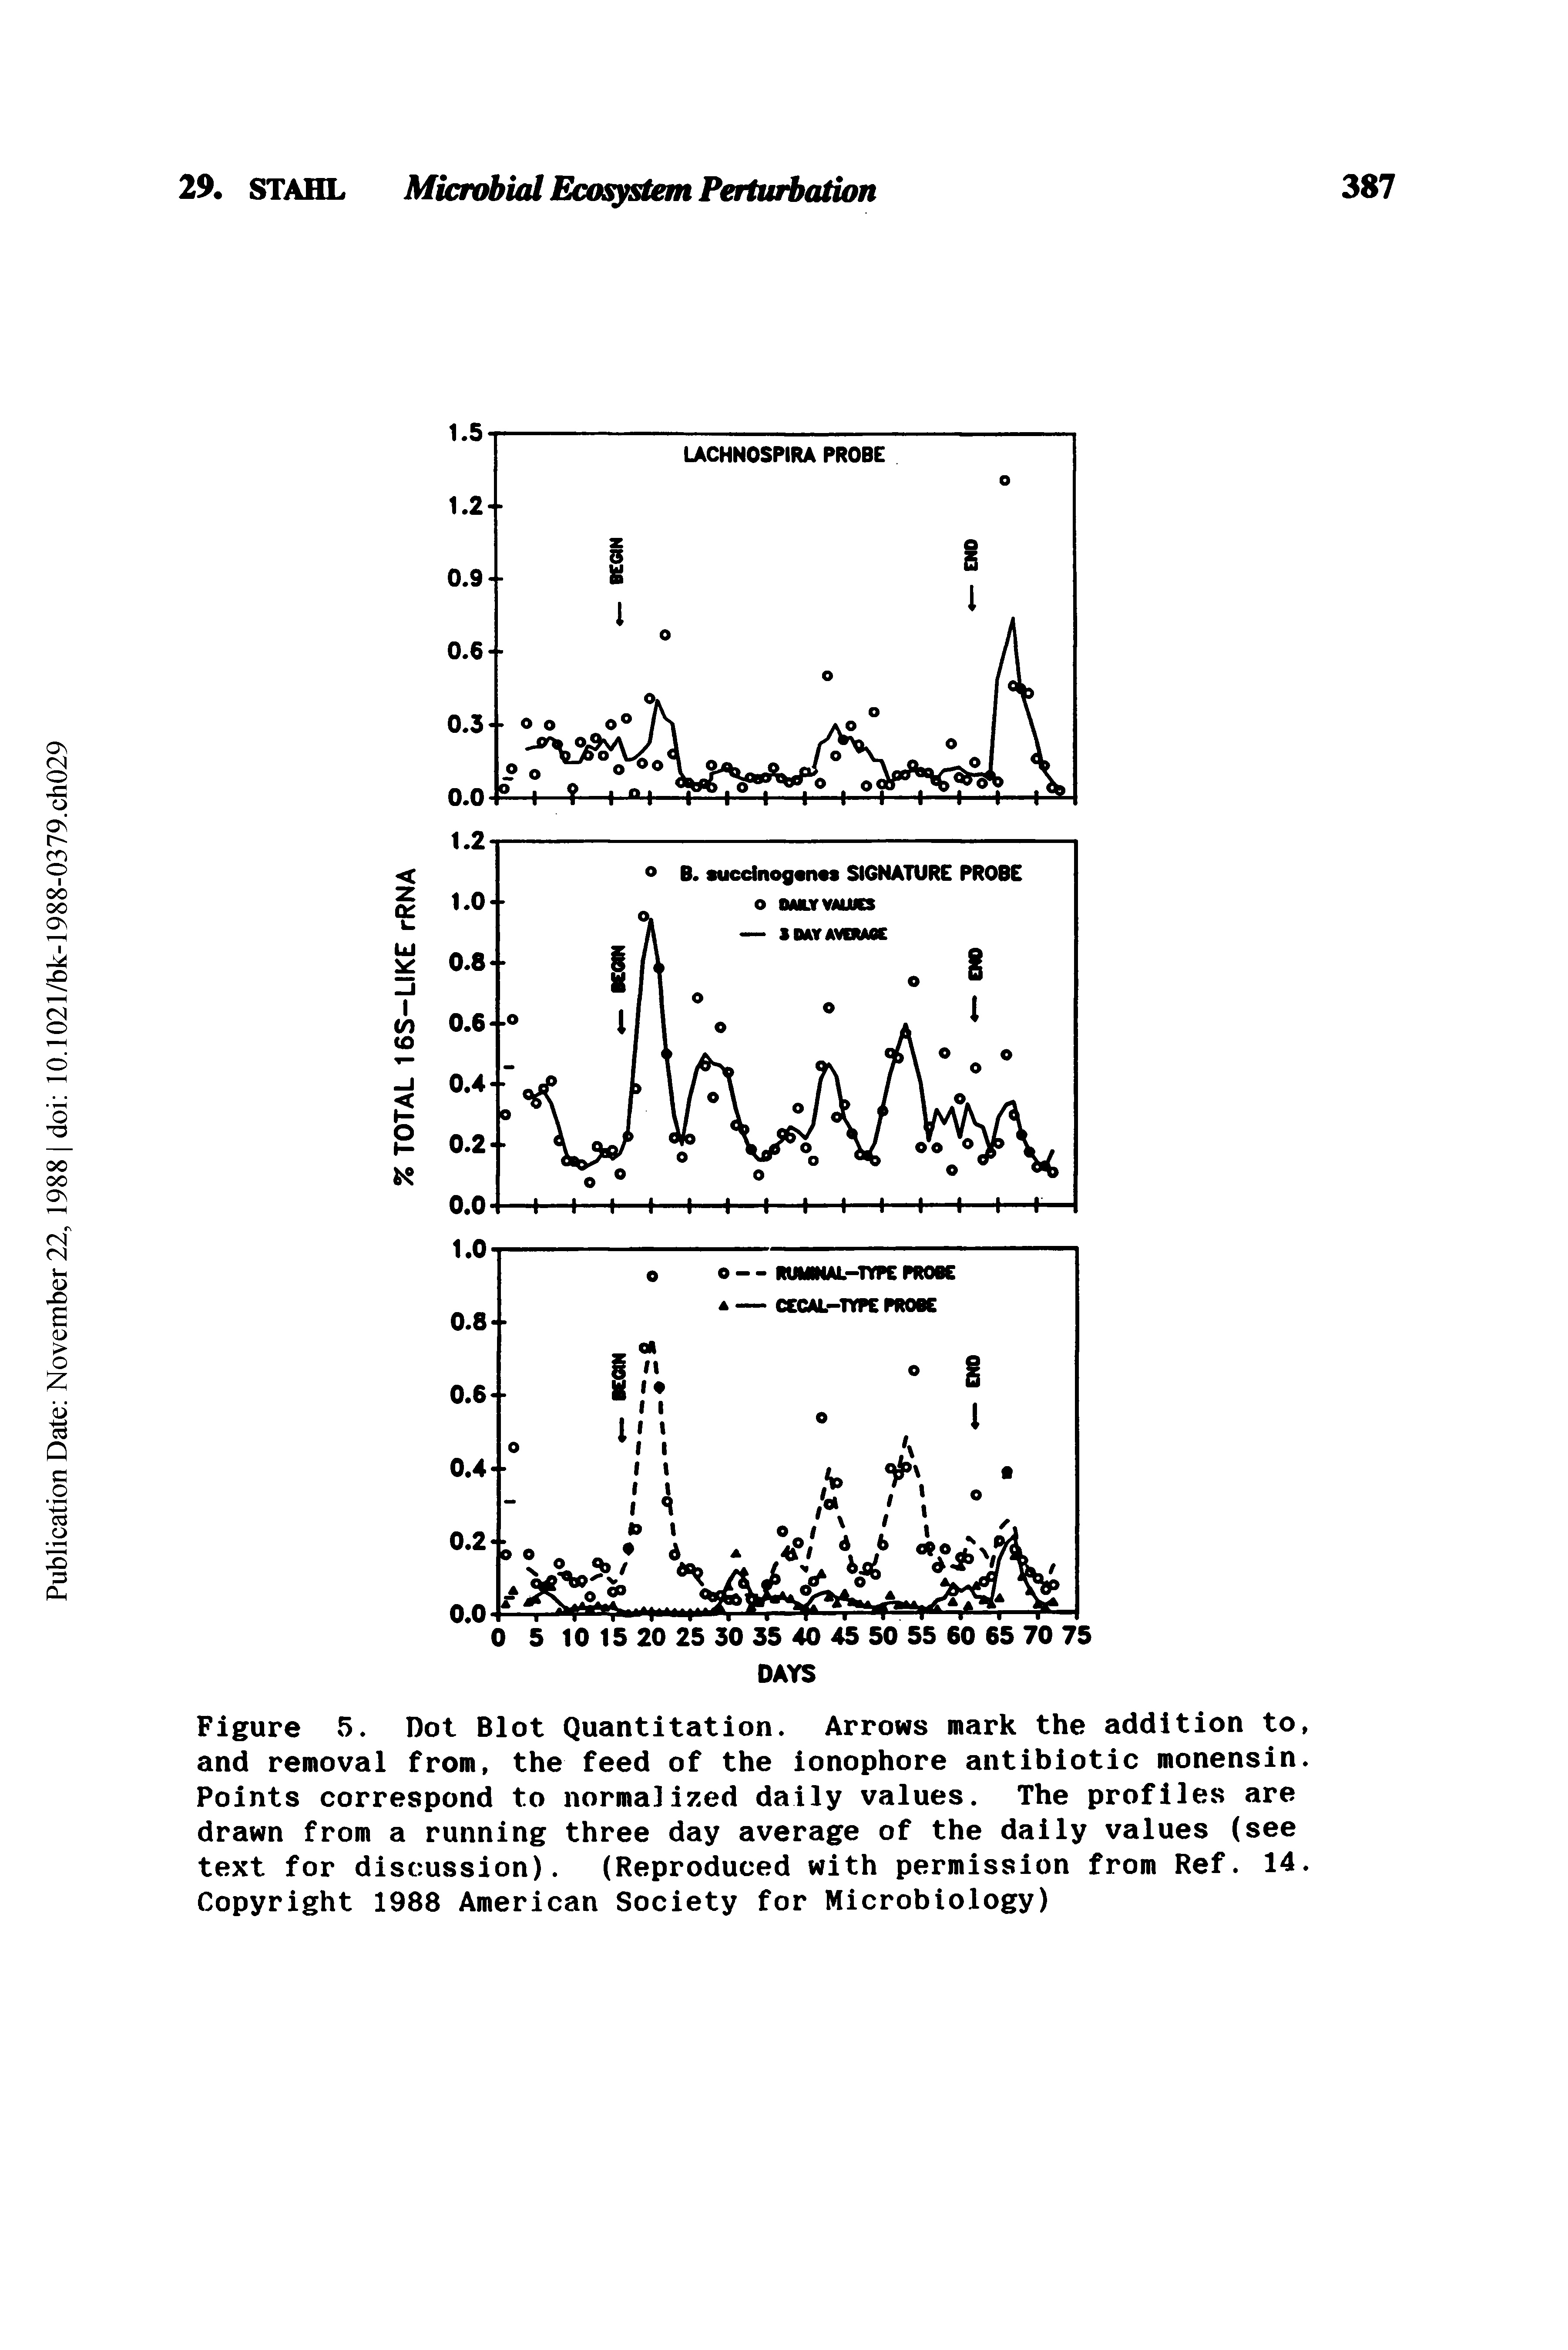 Figure 5. Dot Blot Quantitation. Arrows mark the addition to, and removal from, the feed of the ionophore antibiotic monensin. Points correspond to normalized daily values. The profiles are drawn from a running three day average of the daily values (see text for discussion). (Reproduced with permission from Ref. 14. Copyright 1988 American Society for Microbiology)...